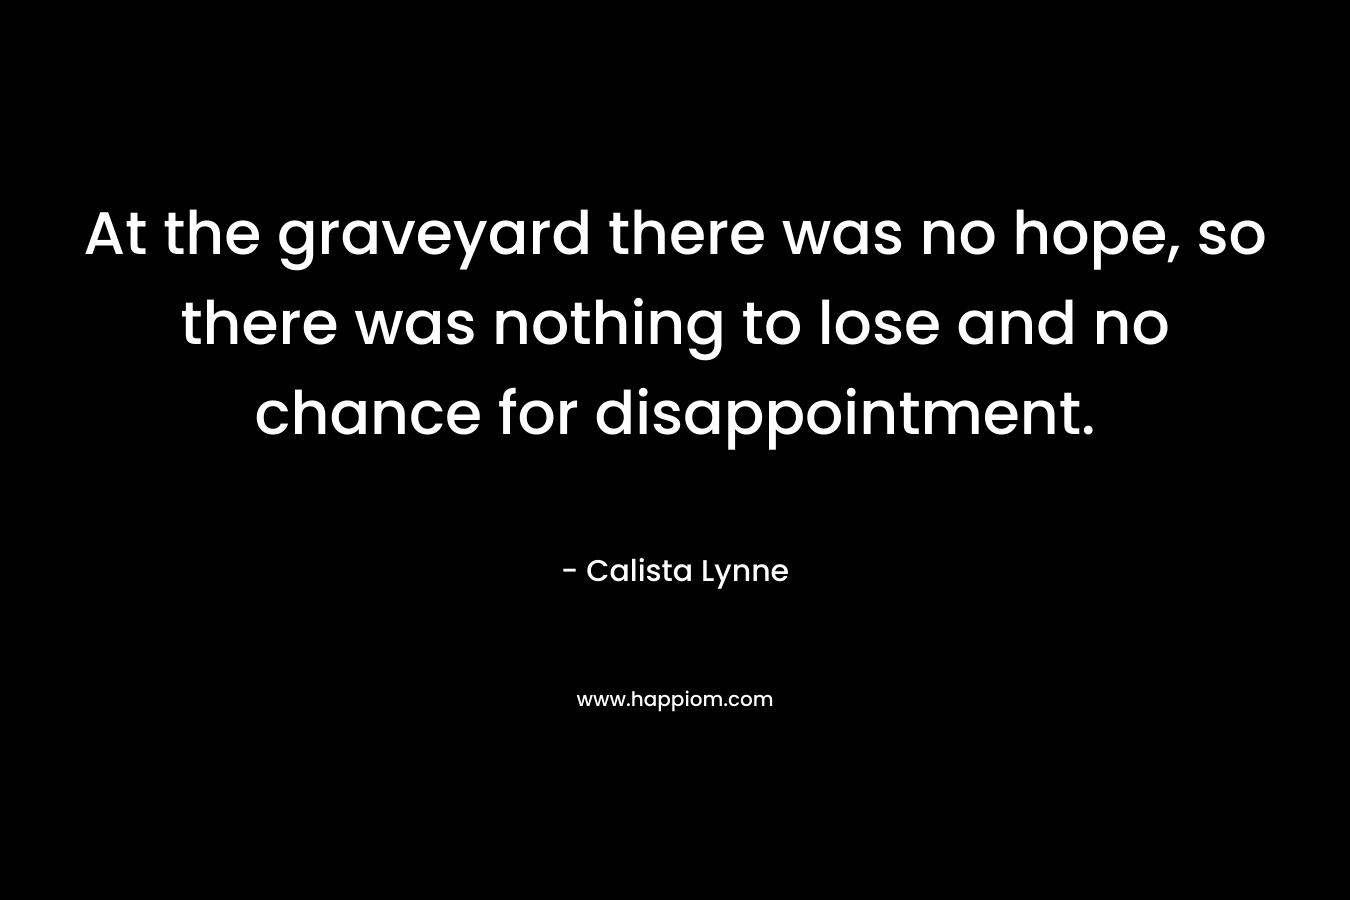 At the graveyard there was no hope, so there was nothing to lose and no chance for disappointment. – Calista Lynne